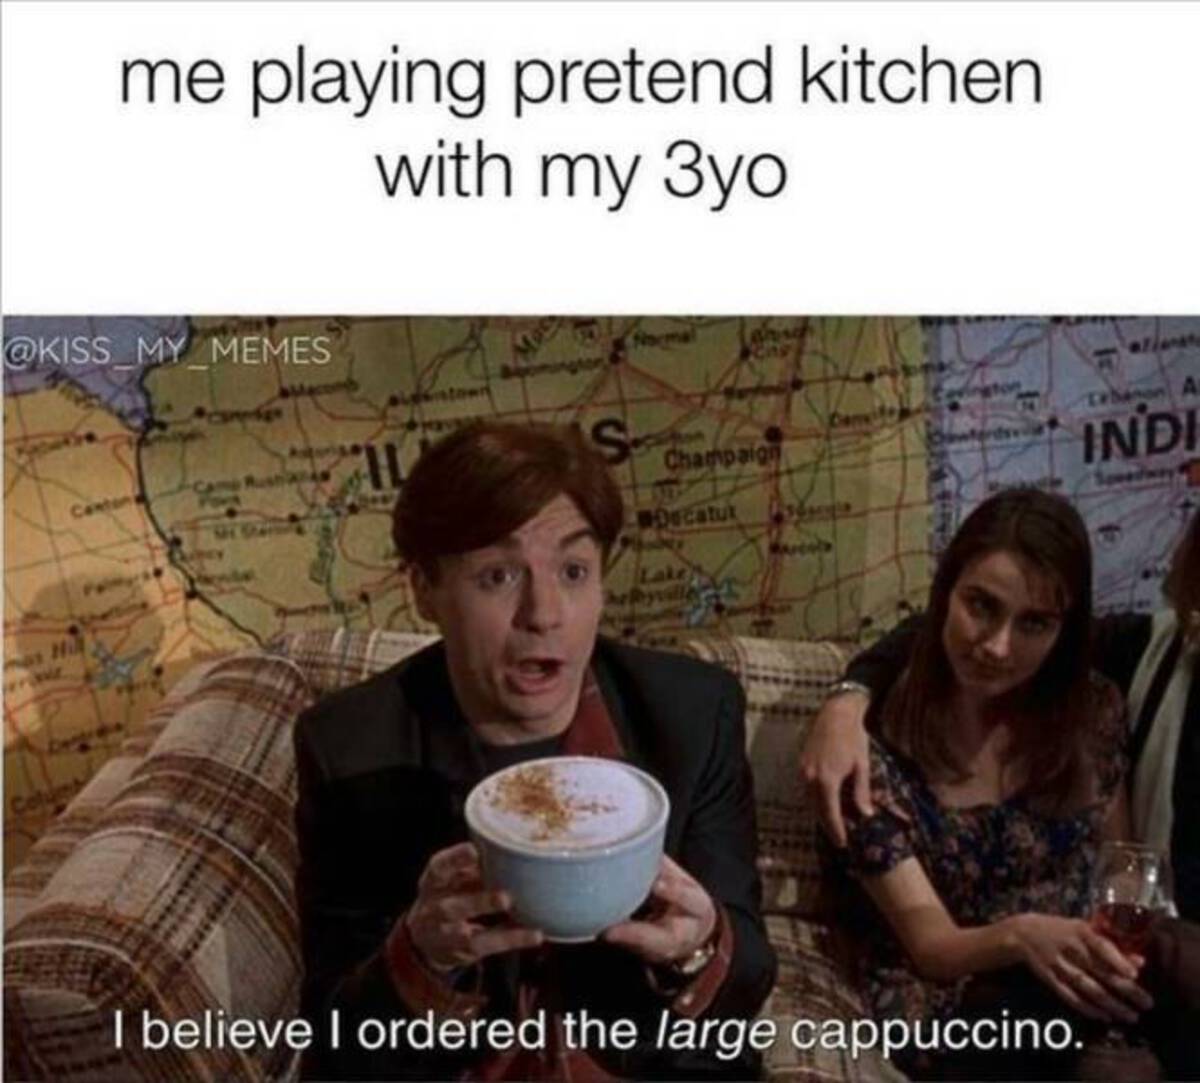 so i married an axe murderer cappuccino gif - me playing pretend kitchen. with my 3yo My Memes S Canton Champaign Indi Oscatur ake I believe I ordered the large cappuccino.